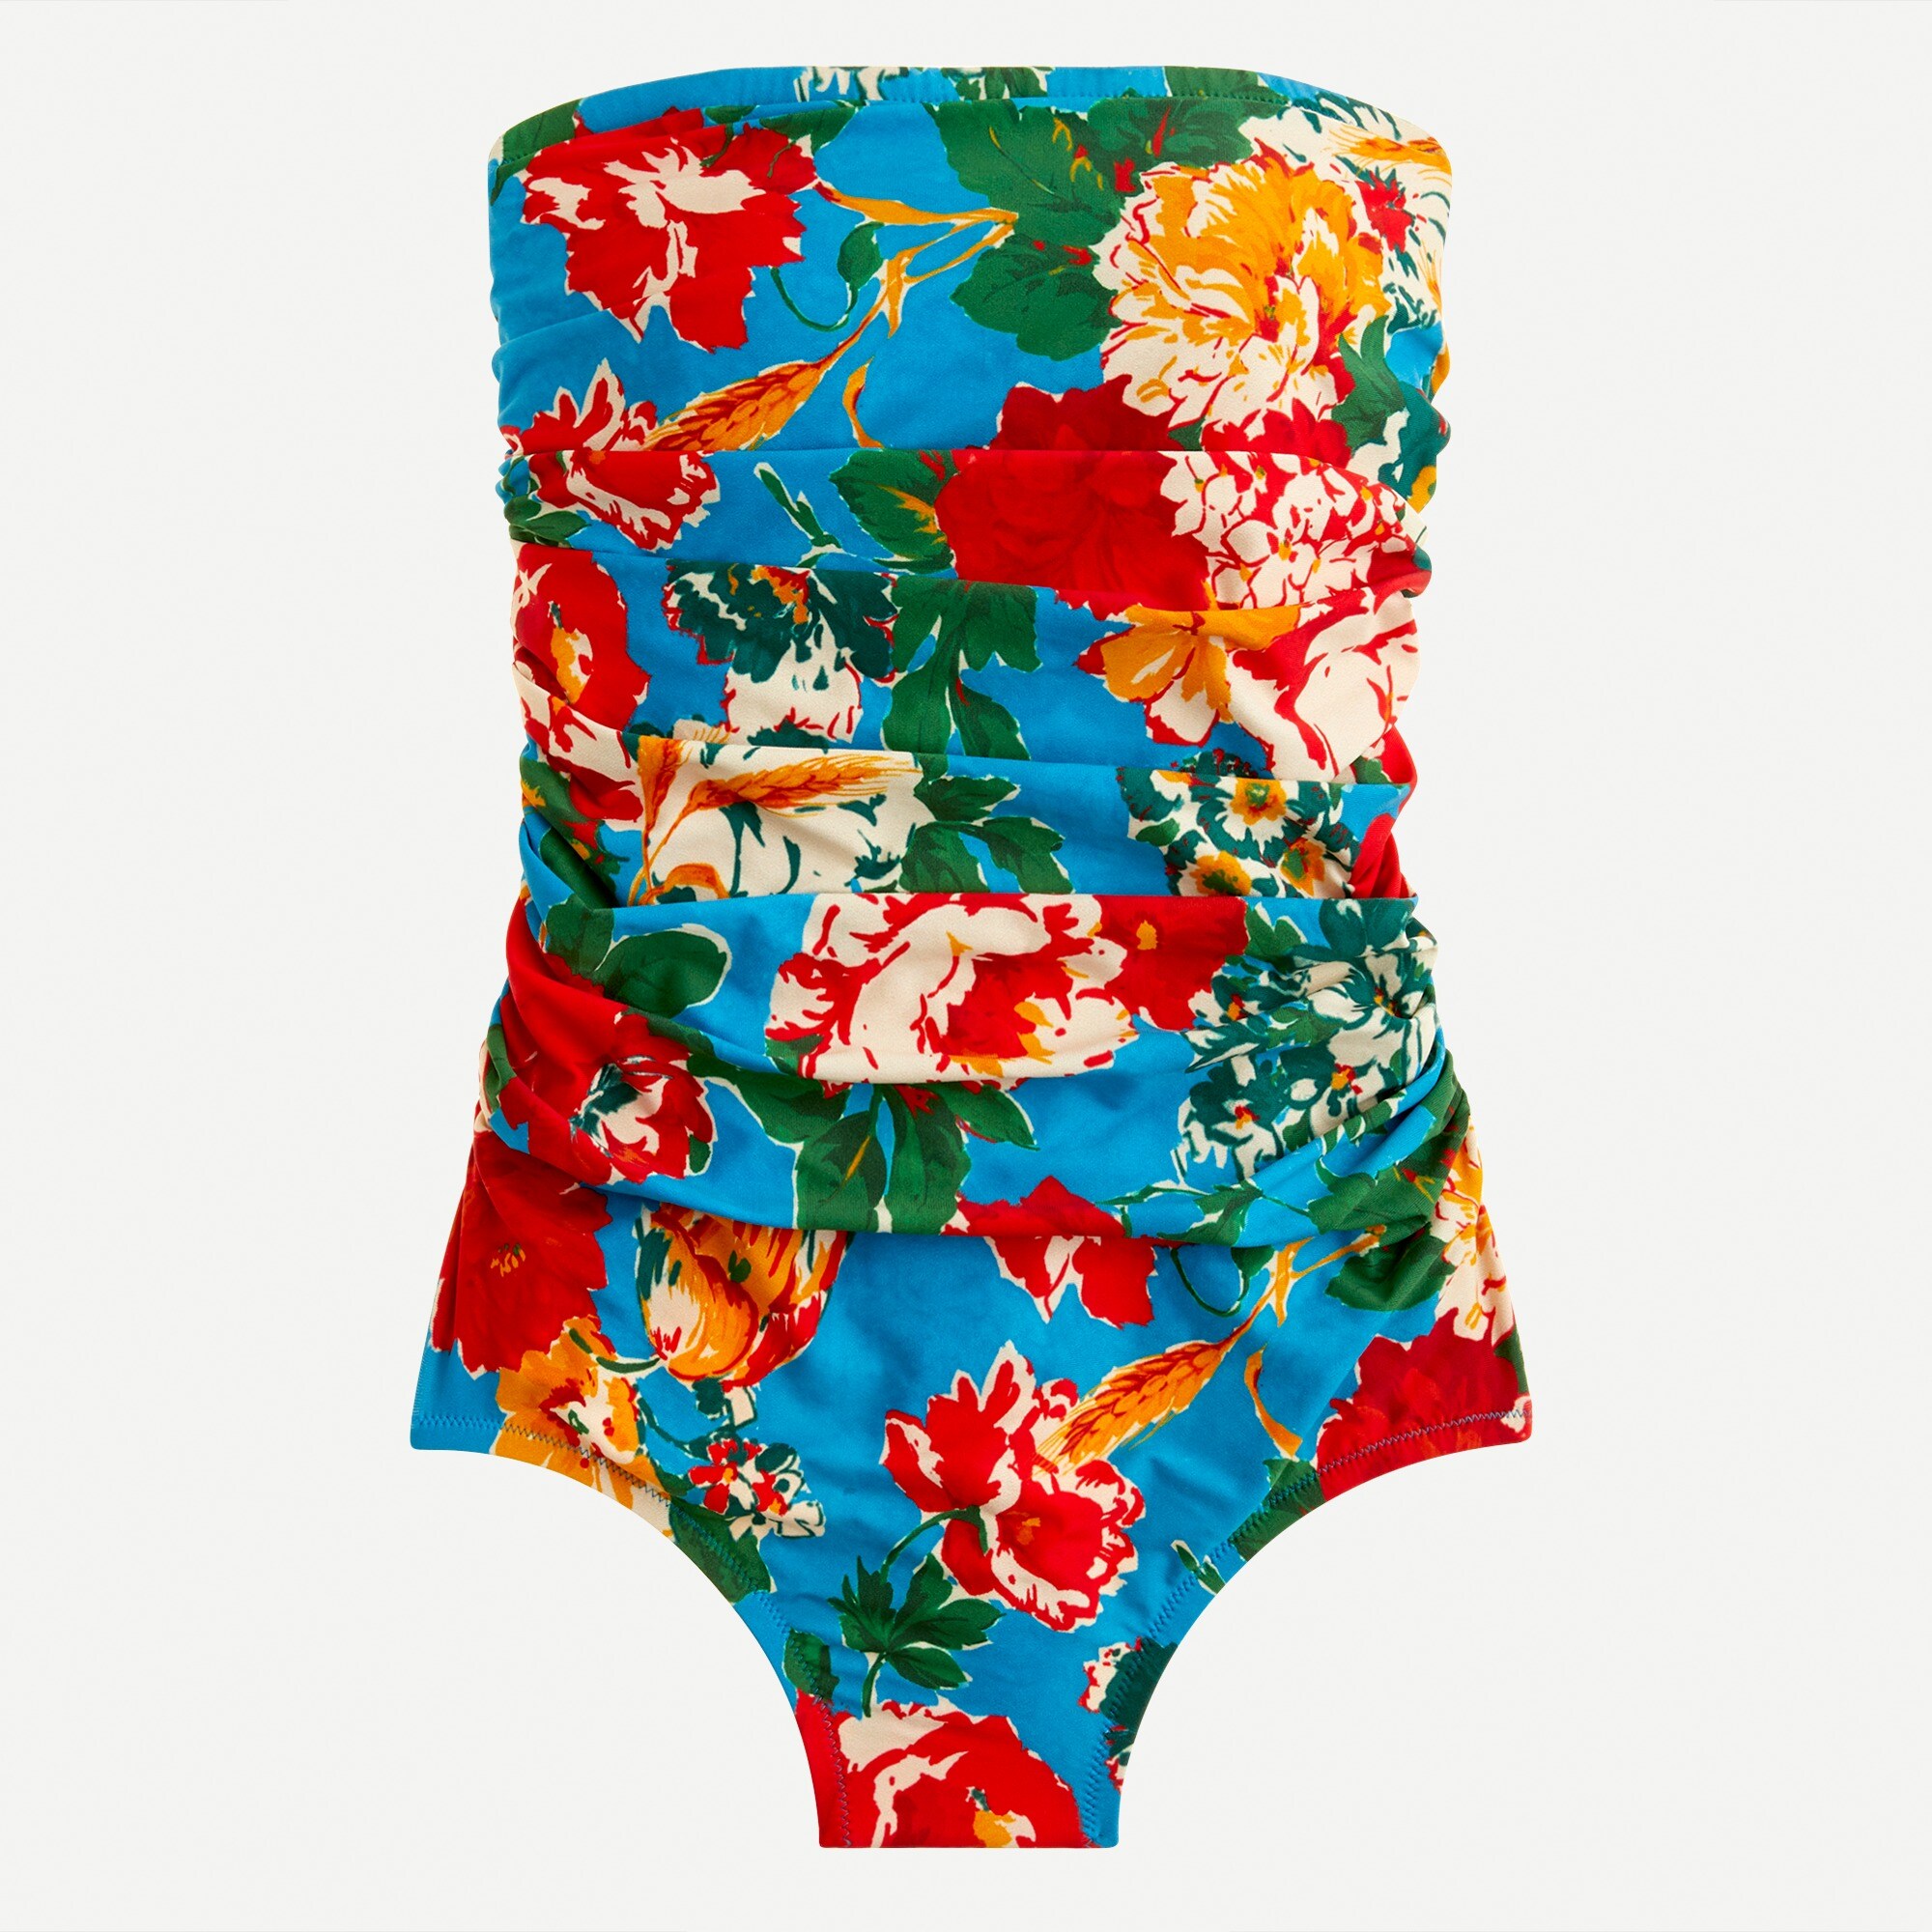 J Crew Ruched Bandeau One Piece Swimsuit In Ratti Bahama Print For Women